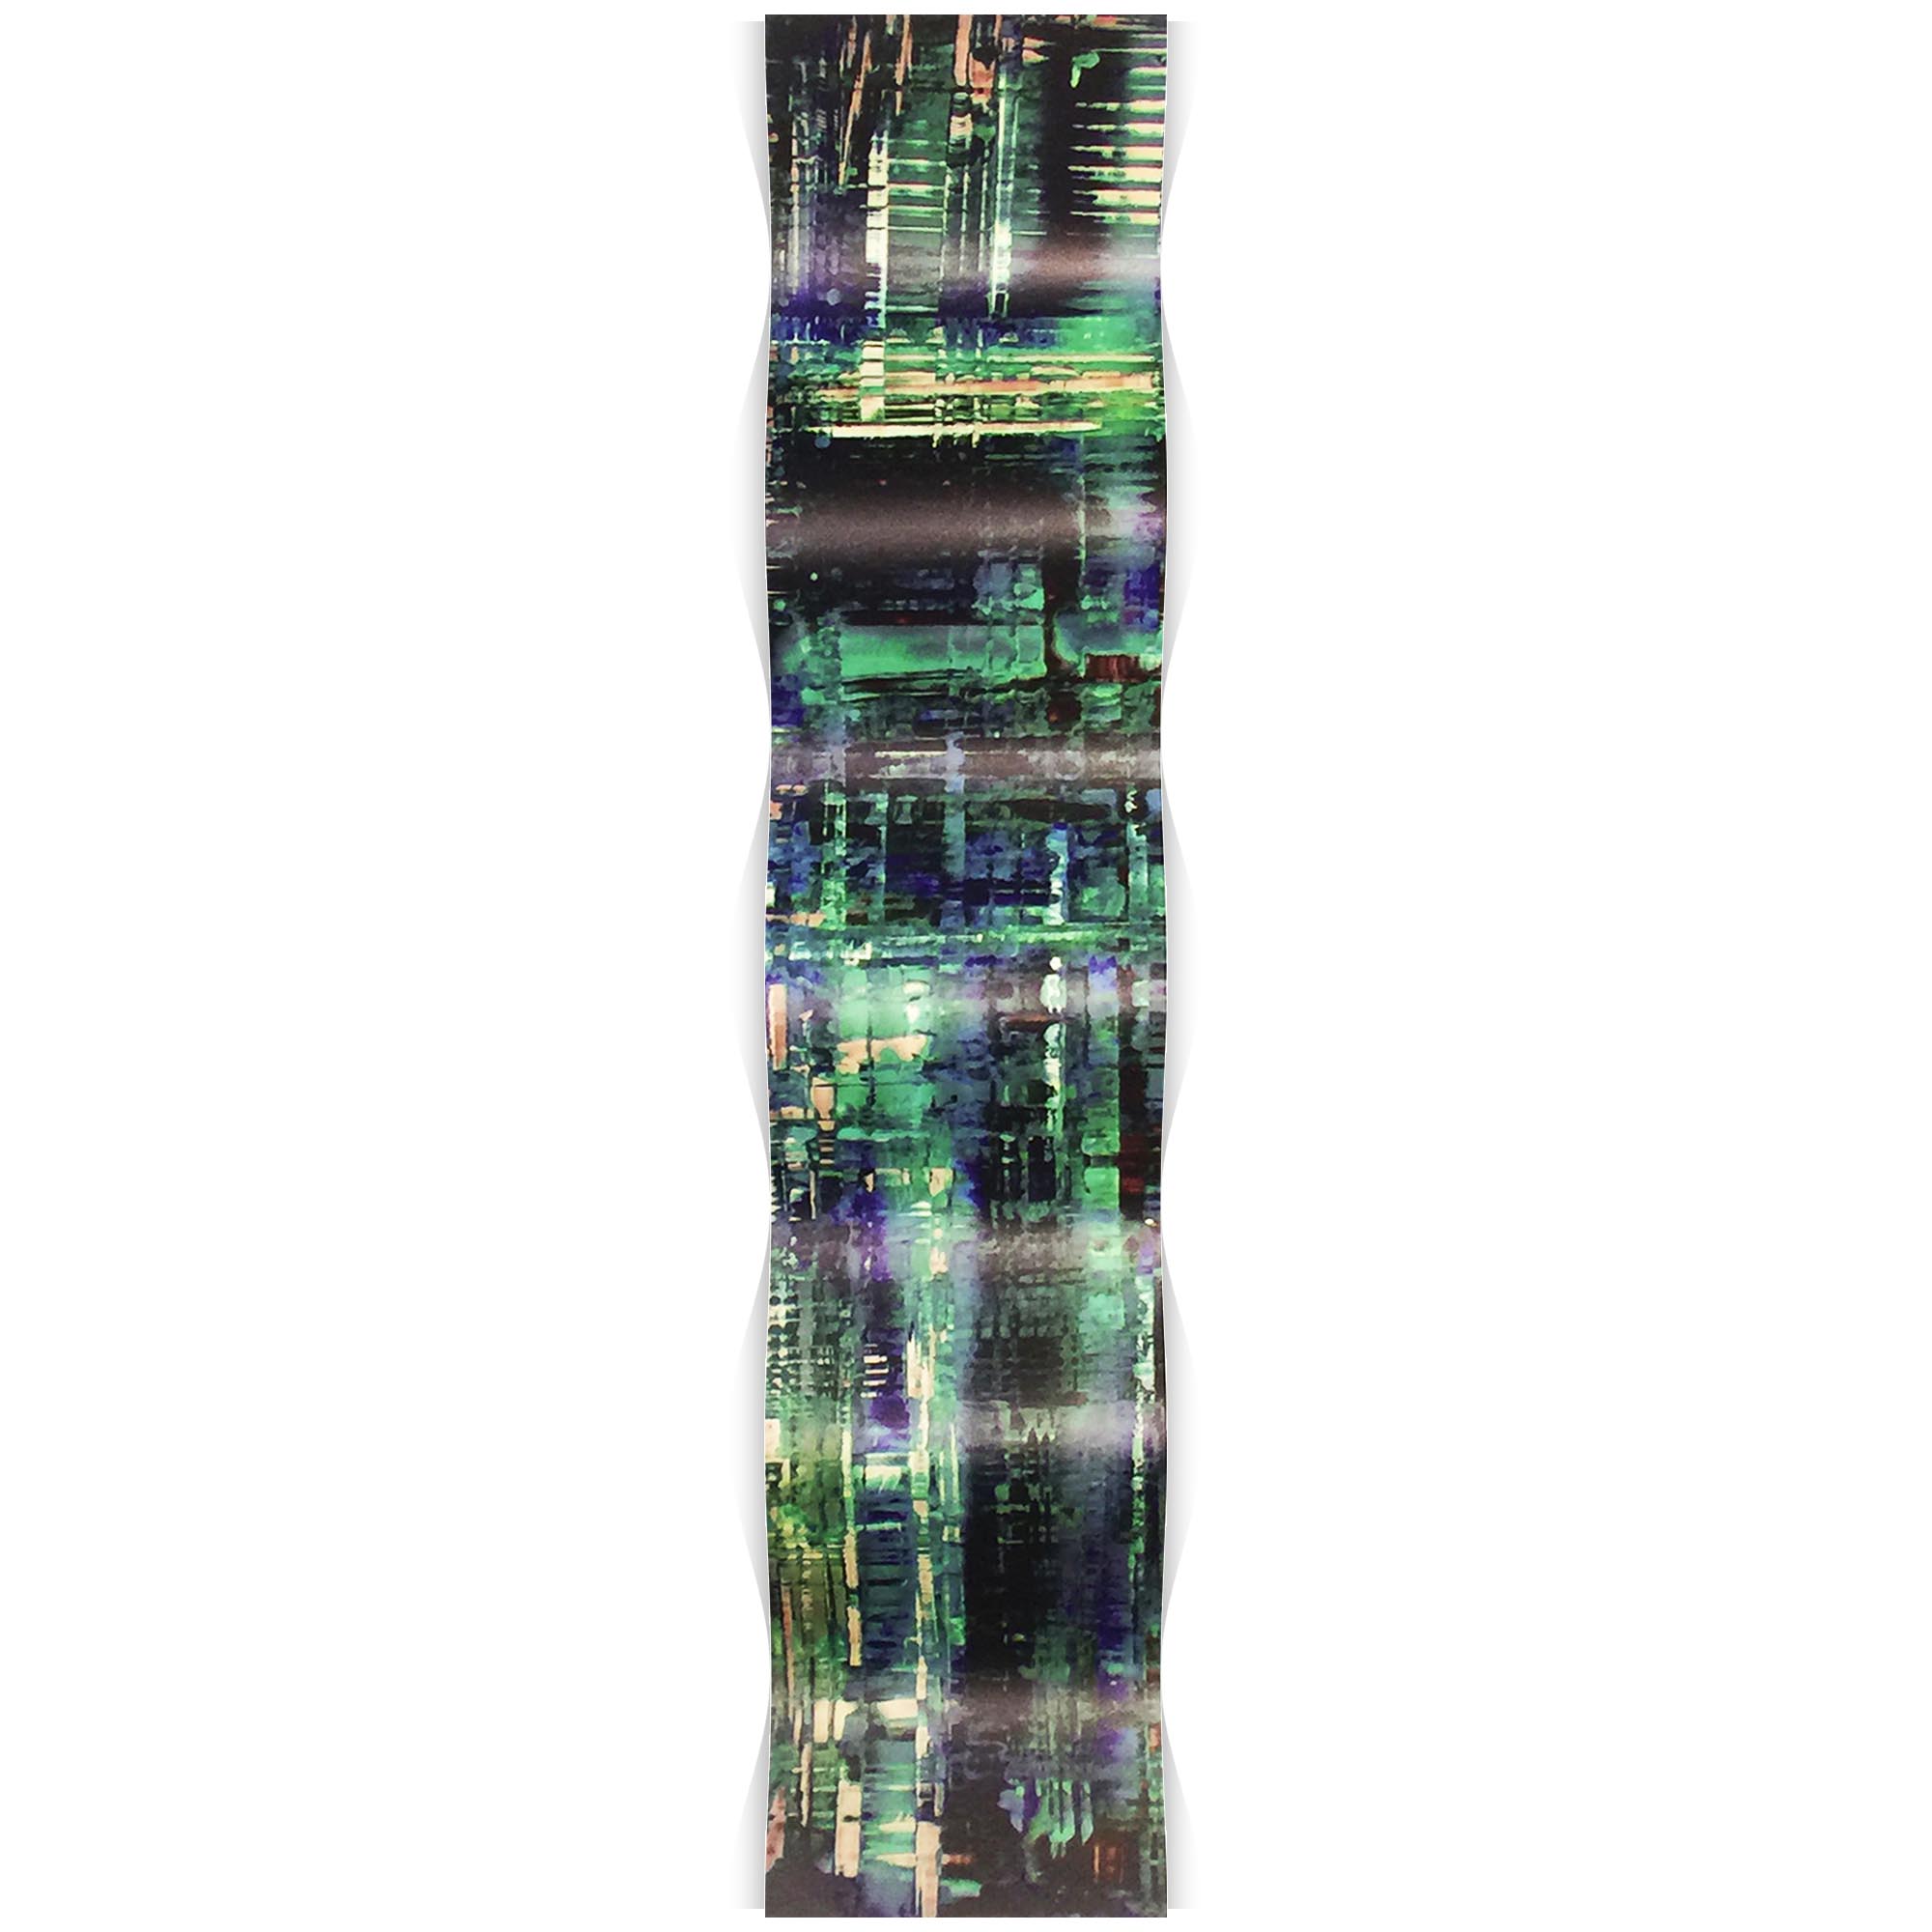 Aporia Blue Wave 9.5x44in. Metal Eclectic Decor - Image 2